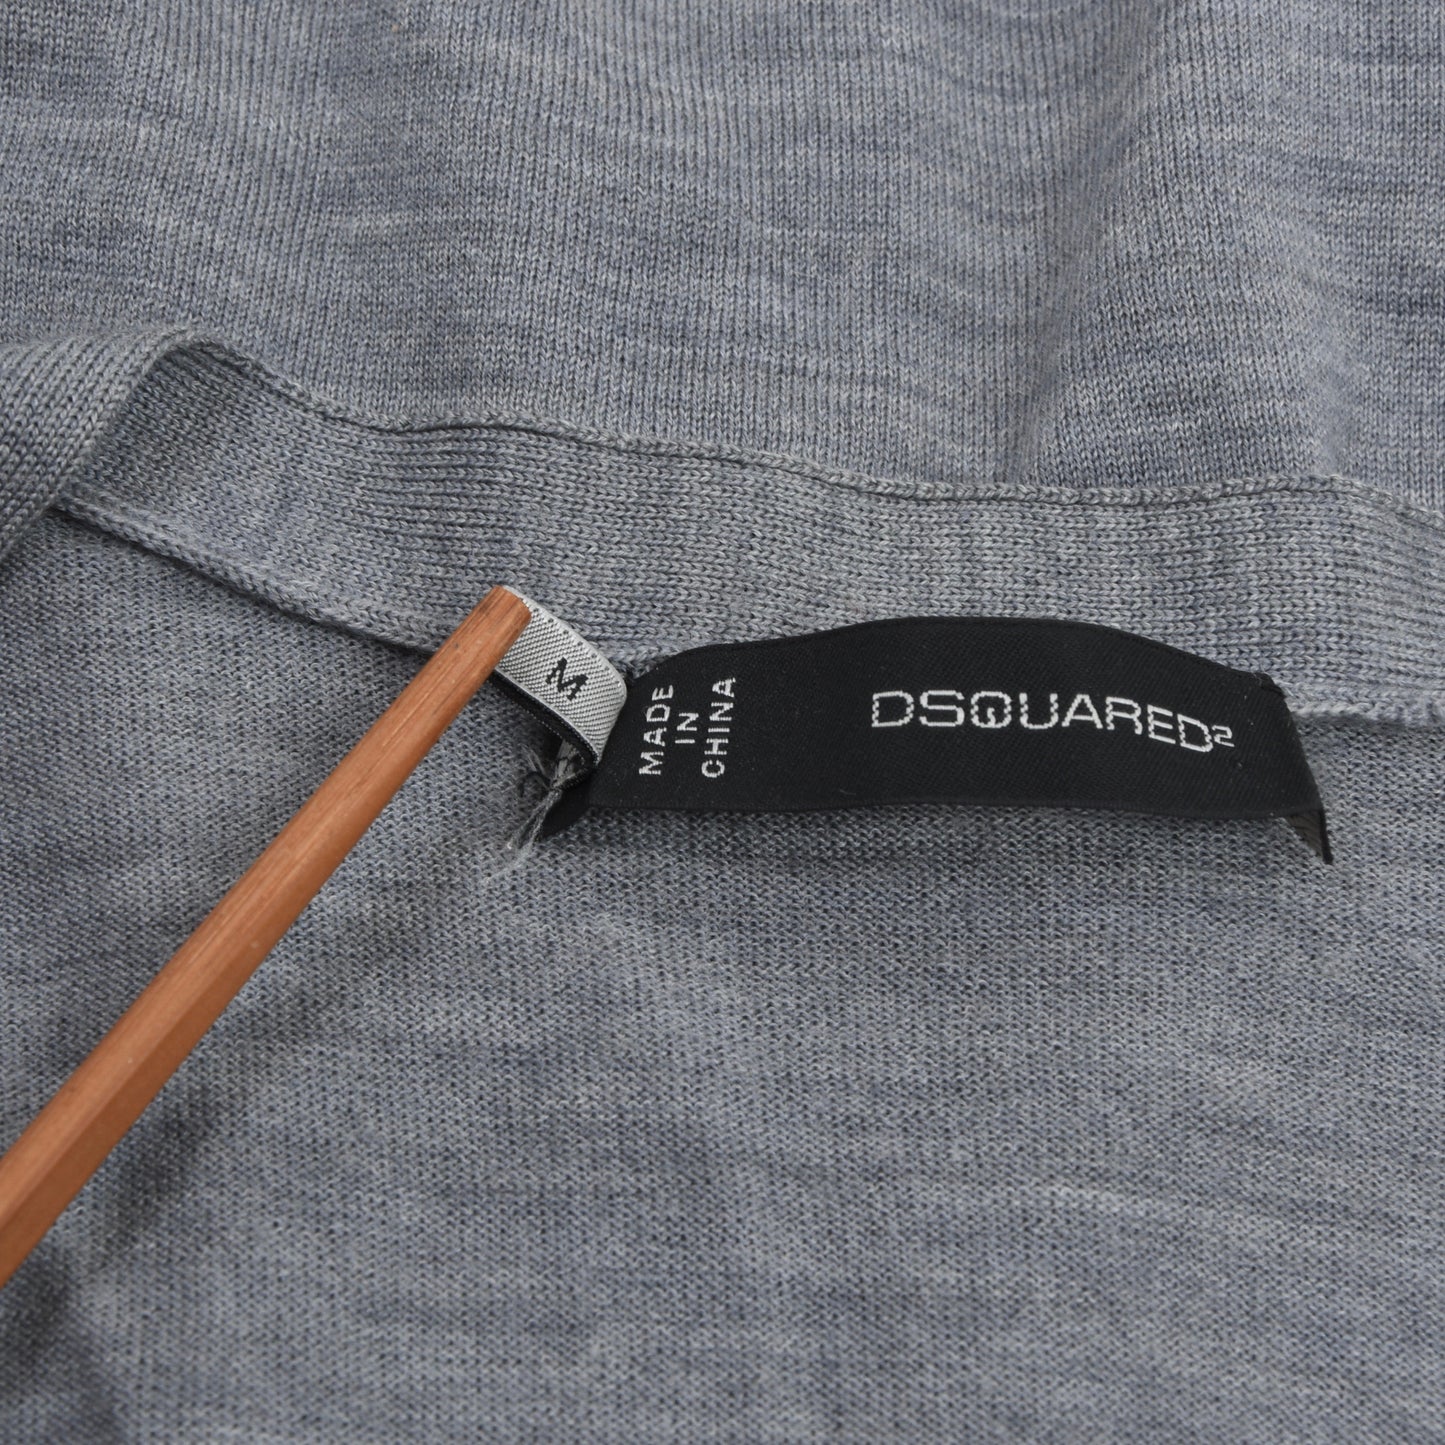 DSquared2 Wool Cardigan Sweater Size M - Color Block